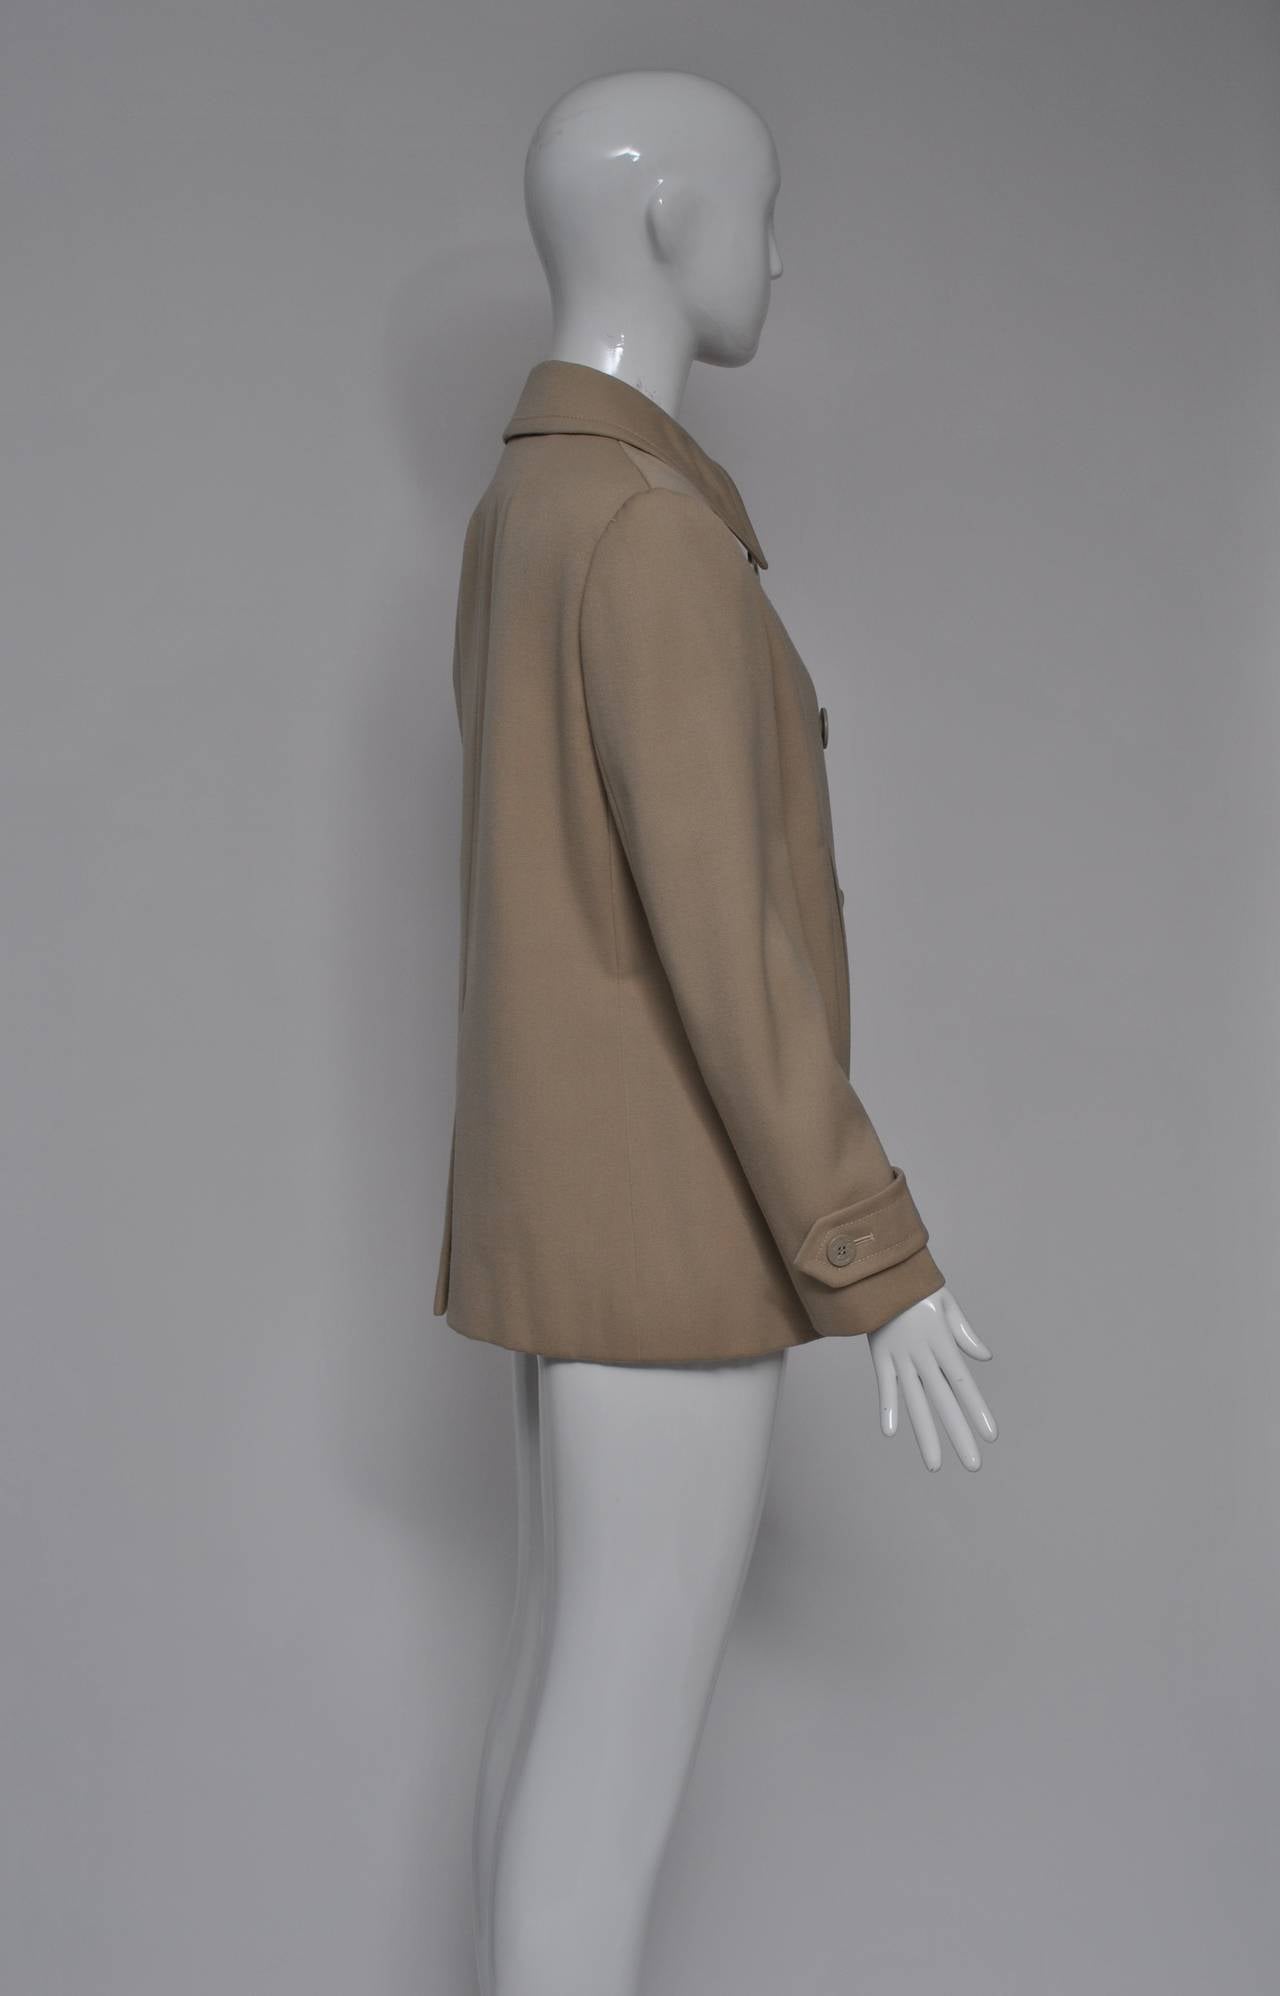 Nicely styled and fashioned Bill Blass pea coat from the 1970s in beige gabardine. Double breasted with nautical-theme buttons, tabs at the wrists and at the neck, and straight, slash pockets. Trim silhouette, print lining. No signs of wear.